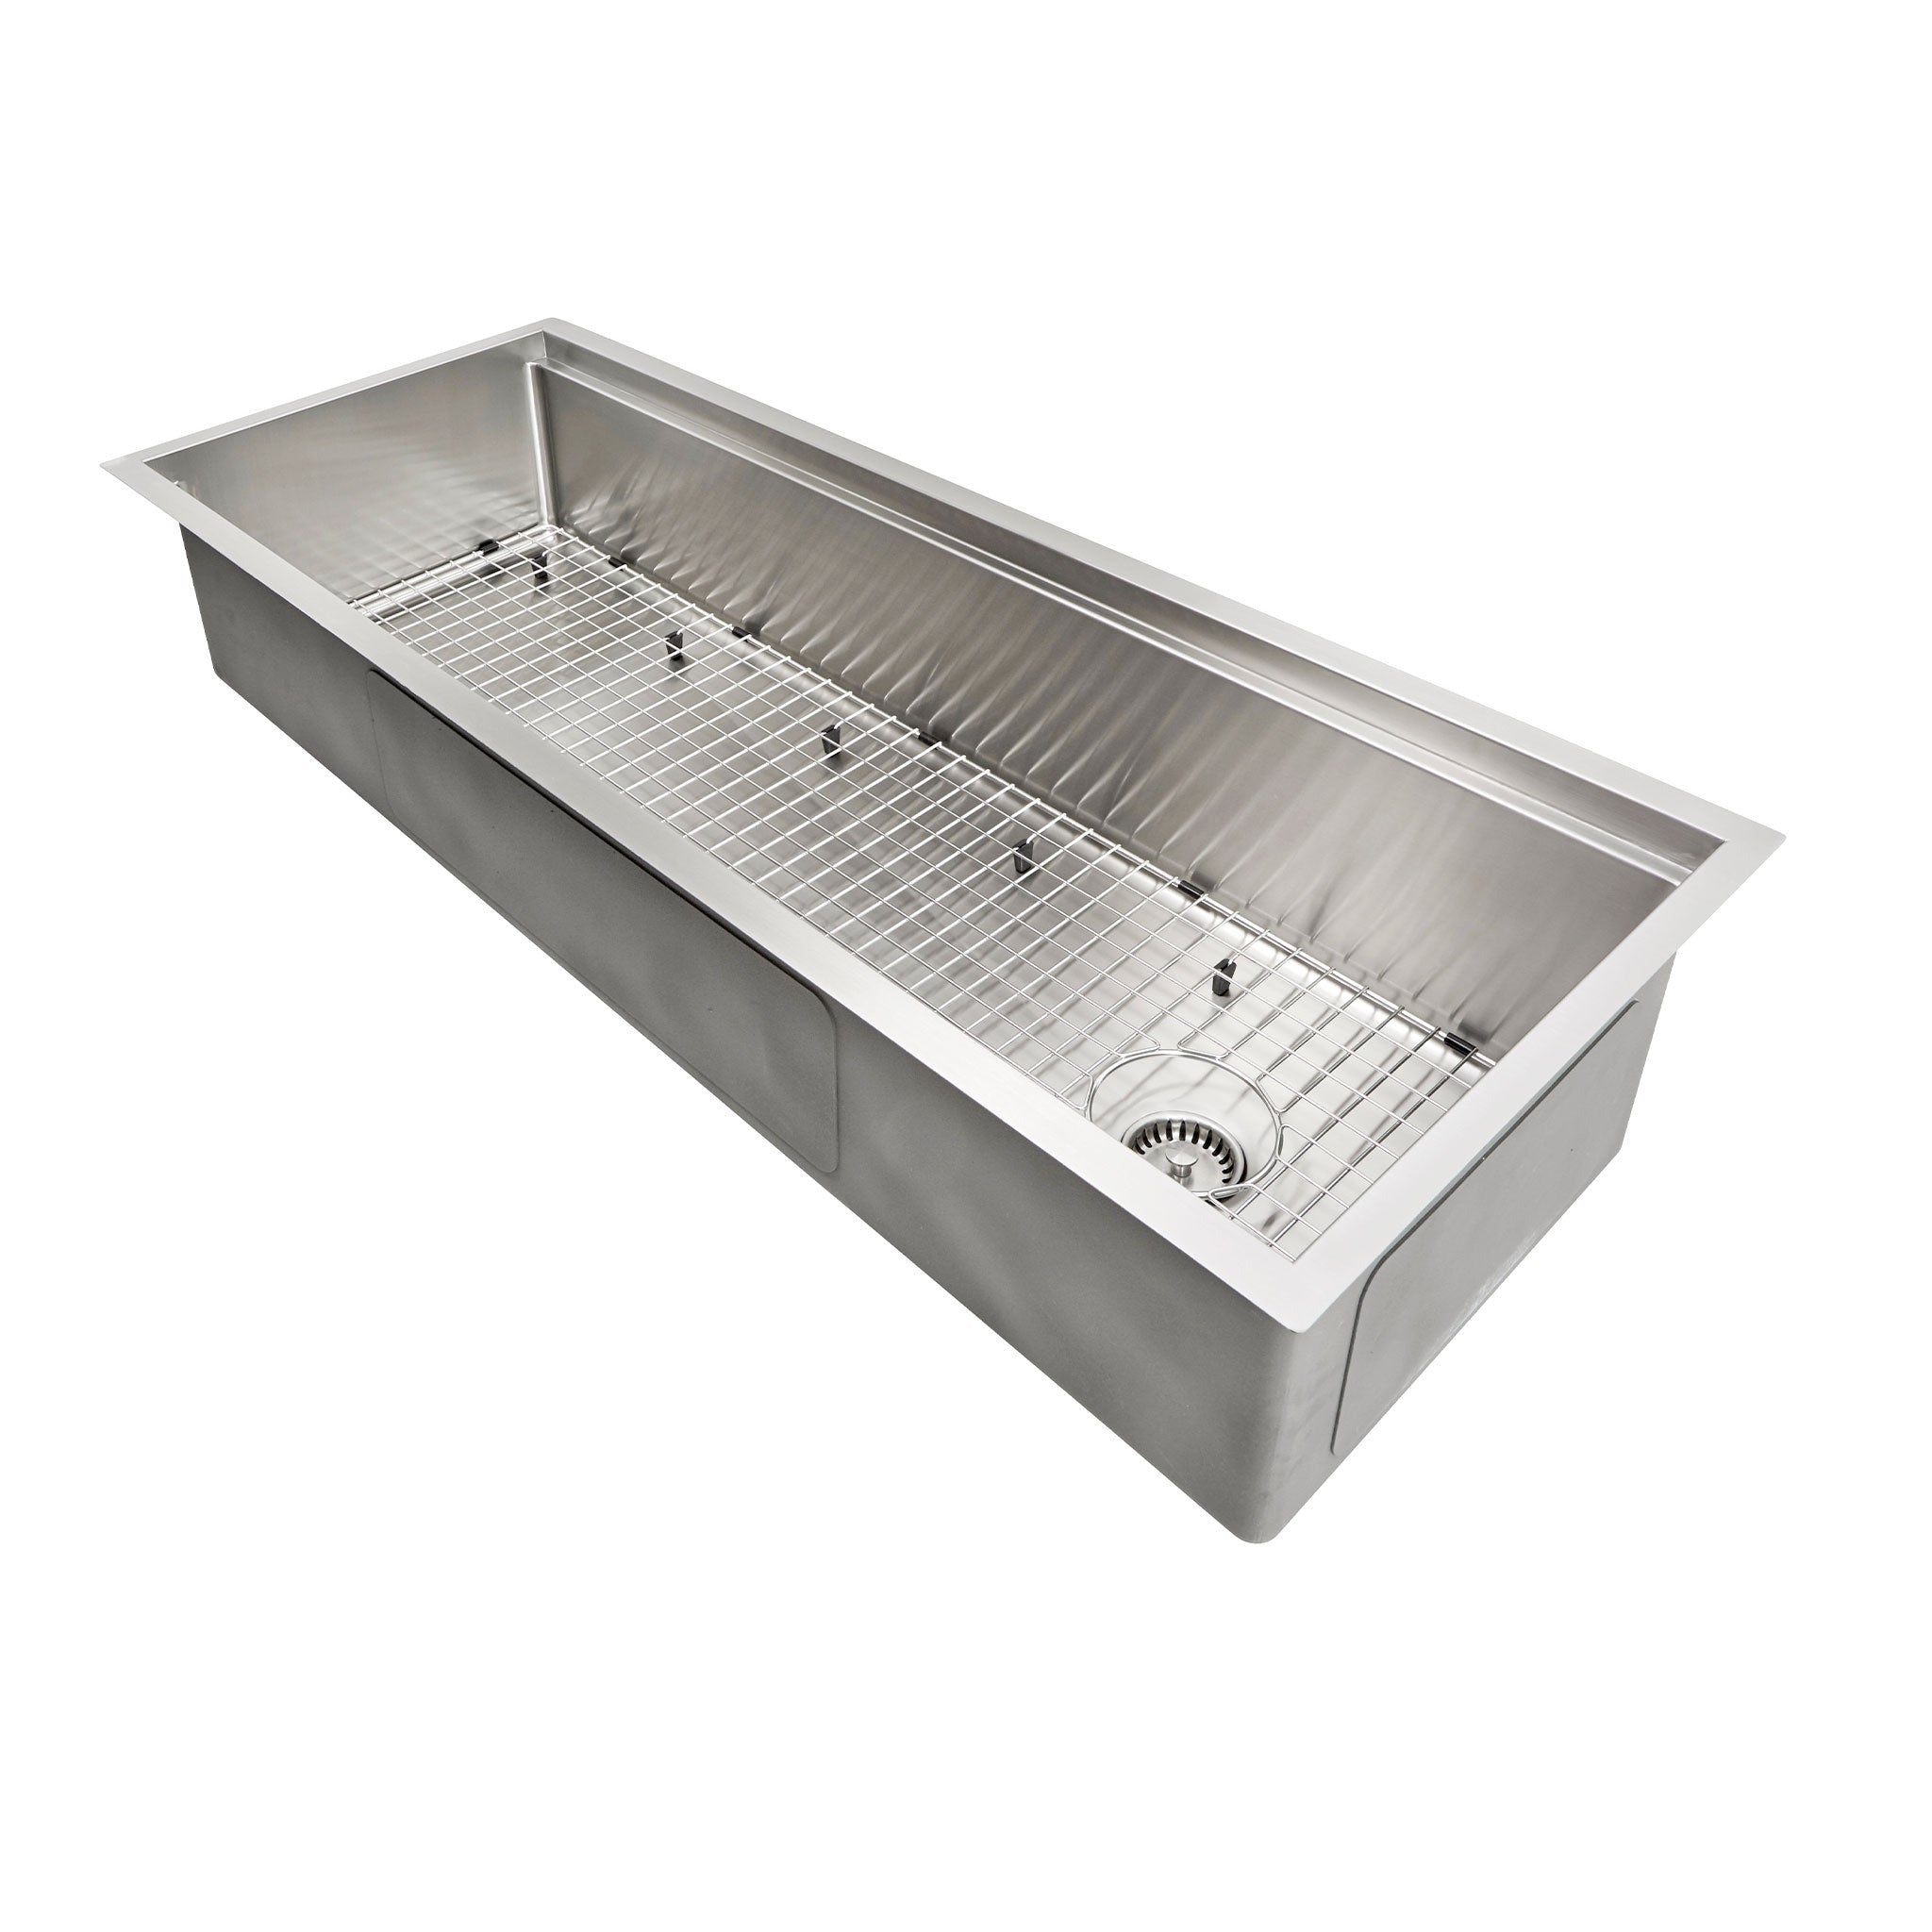 Seamless drain and protective grate for basin in a 46" workstation sink